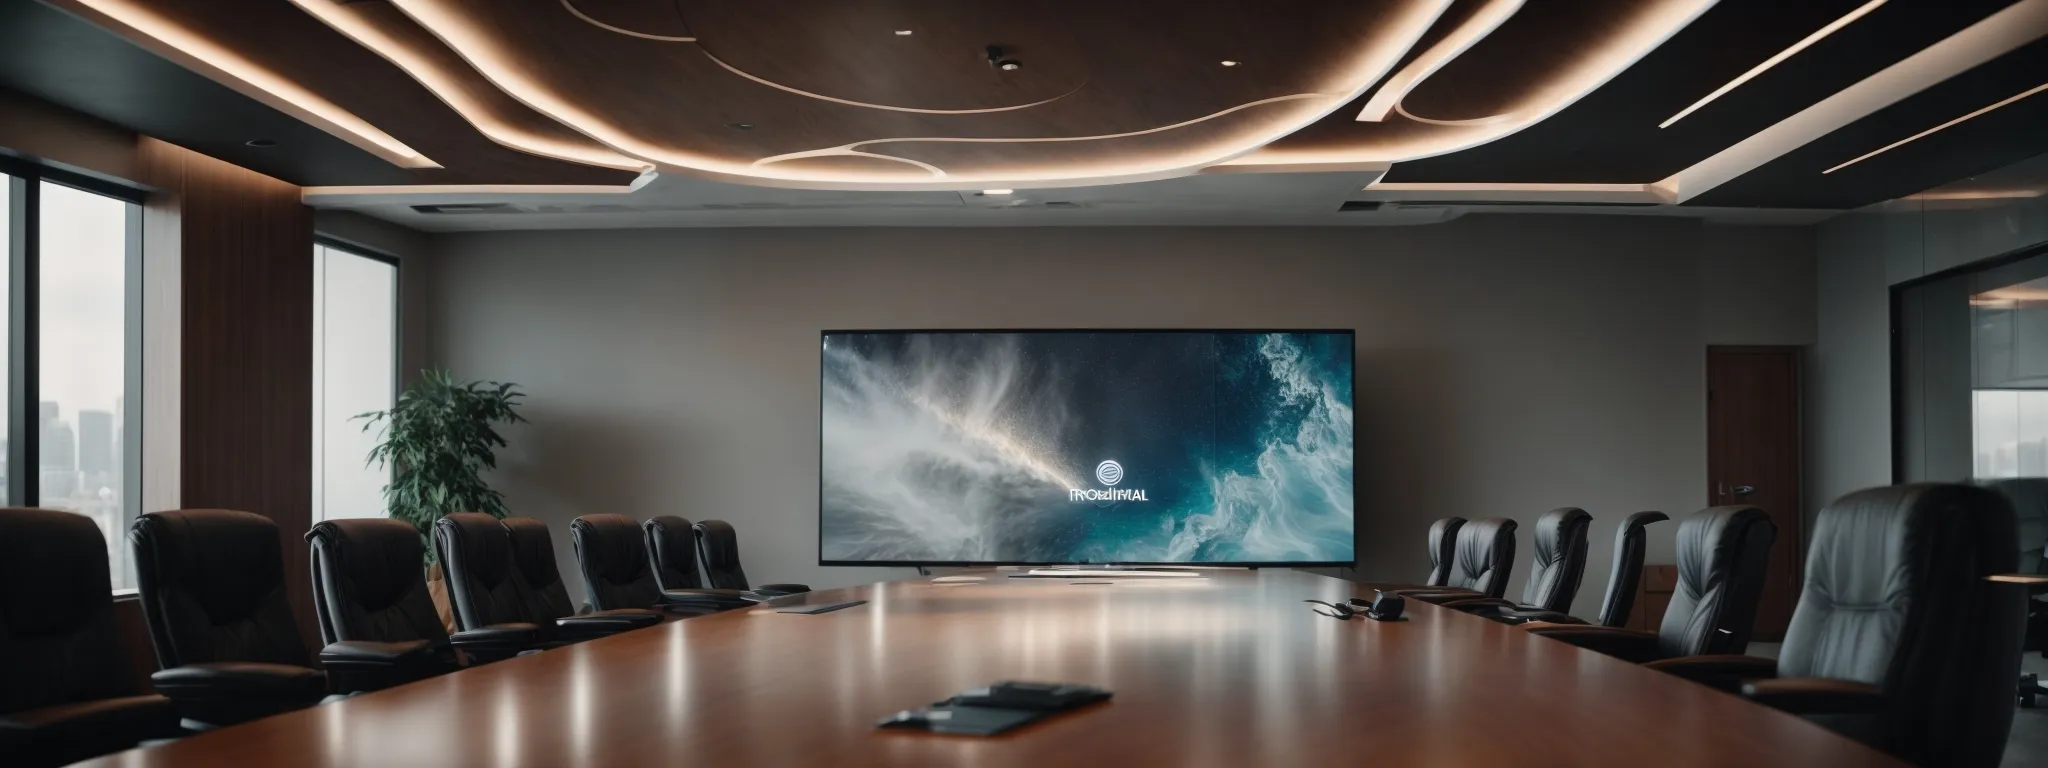 a polished boardroom with a projector displaying a sleek, abstract logo, embodying the future-focused vision of an seo company.